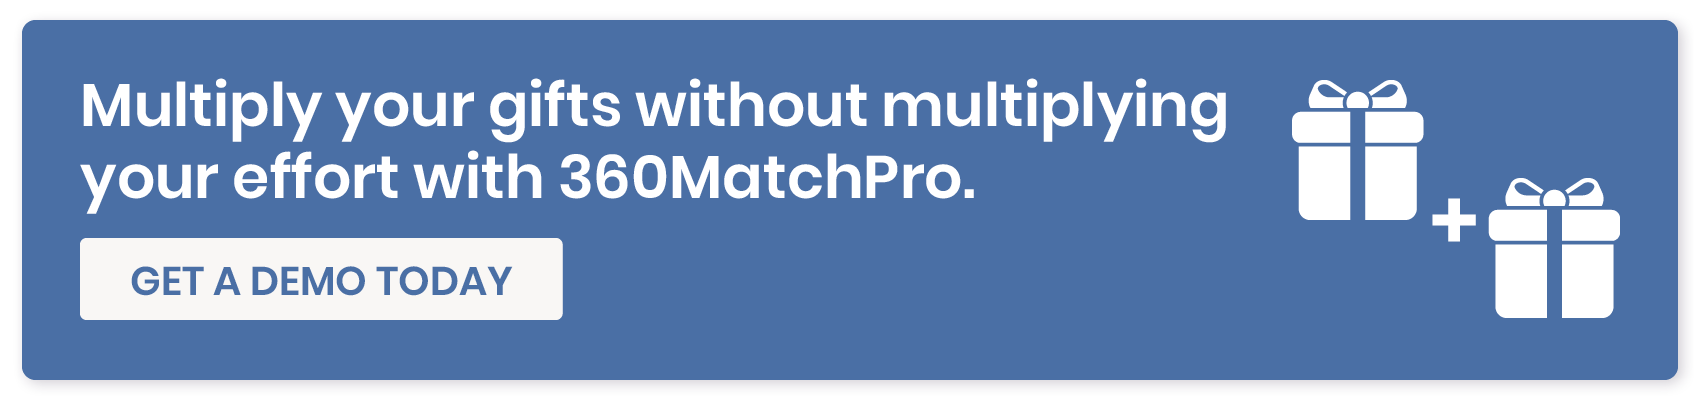 Click here to streamline your matching gift process with 360MatchPro.